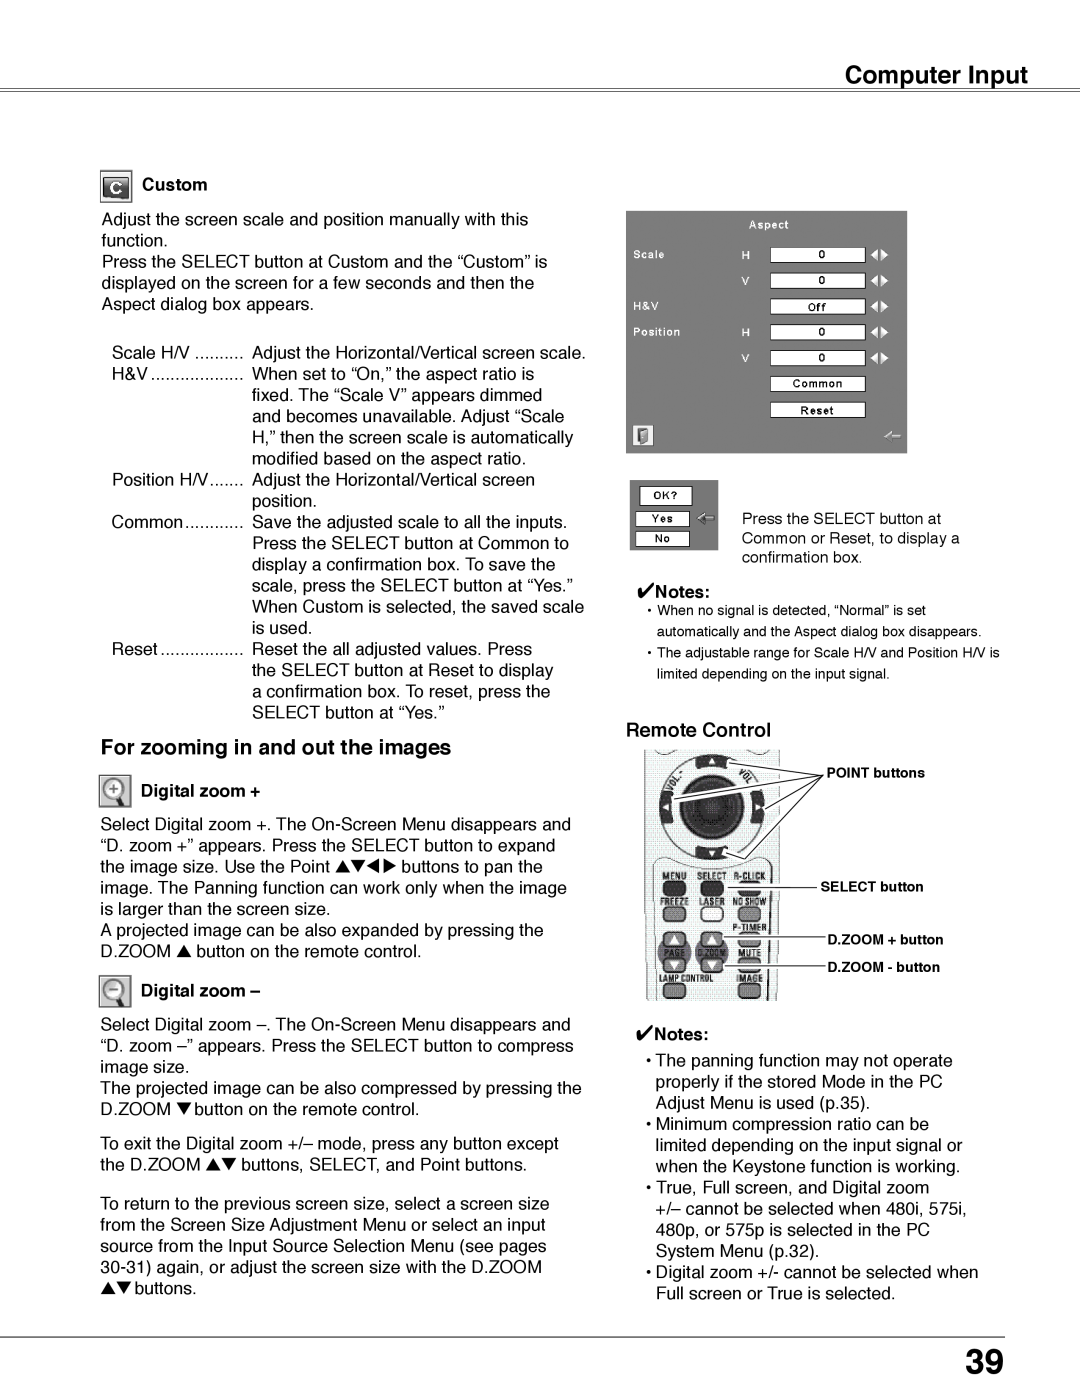 Eiki LC-WB40N owner manual For zooming in and out the images, Computer Input, Remote Control, Custom, Digital zoom +, Notes 